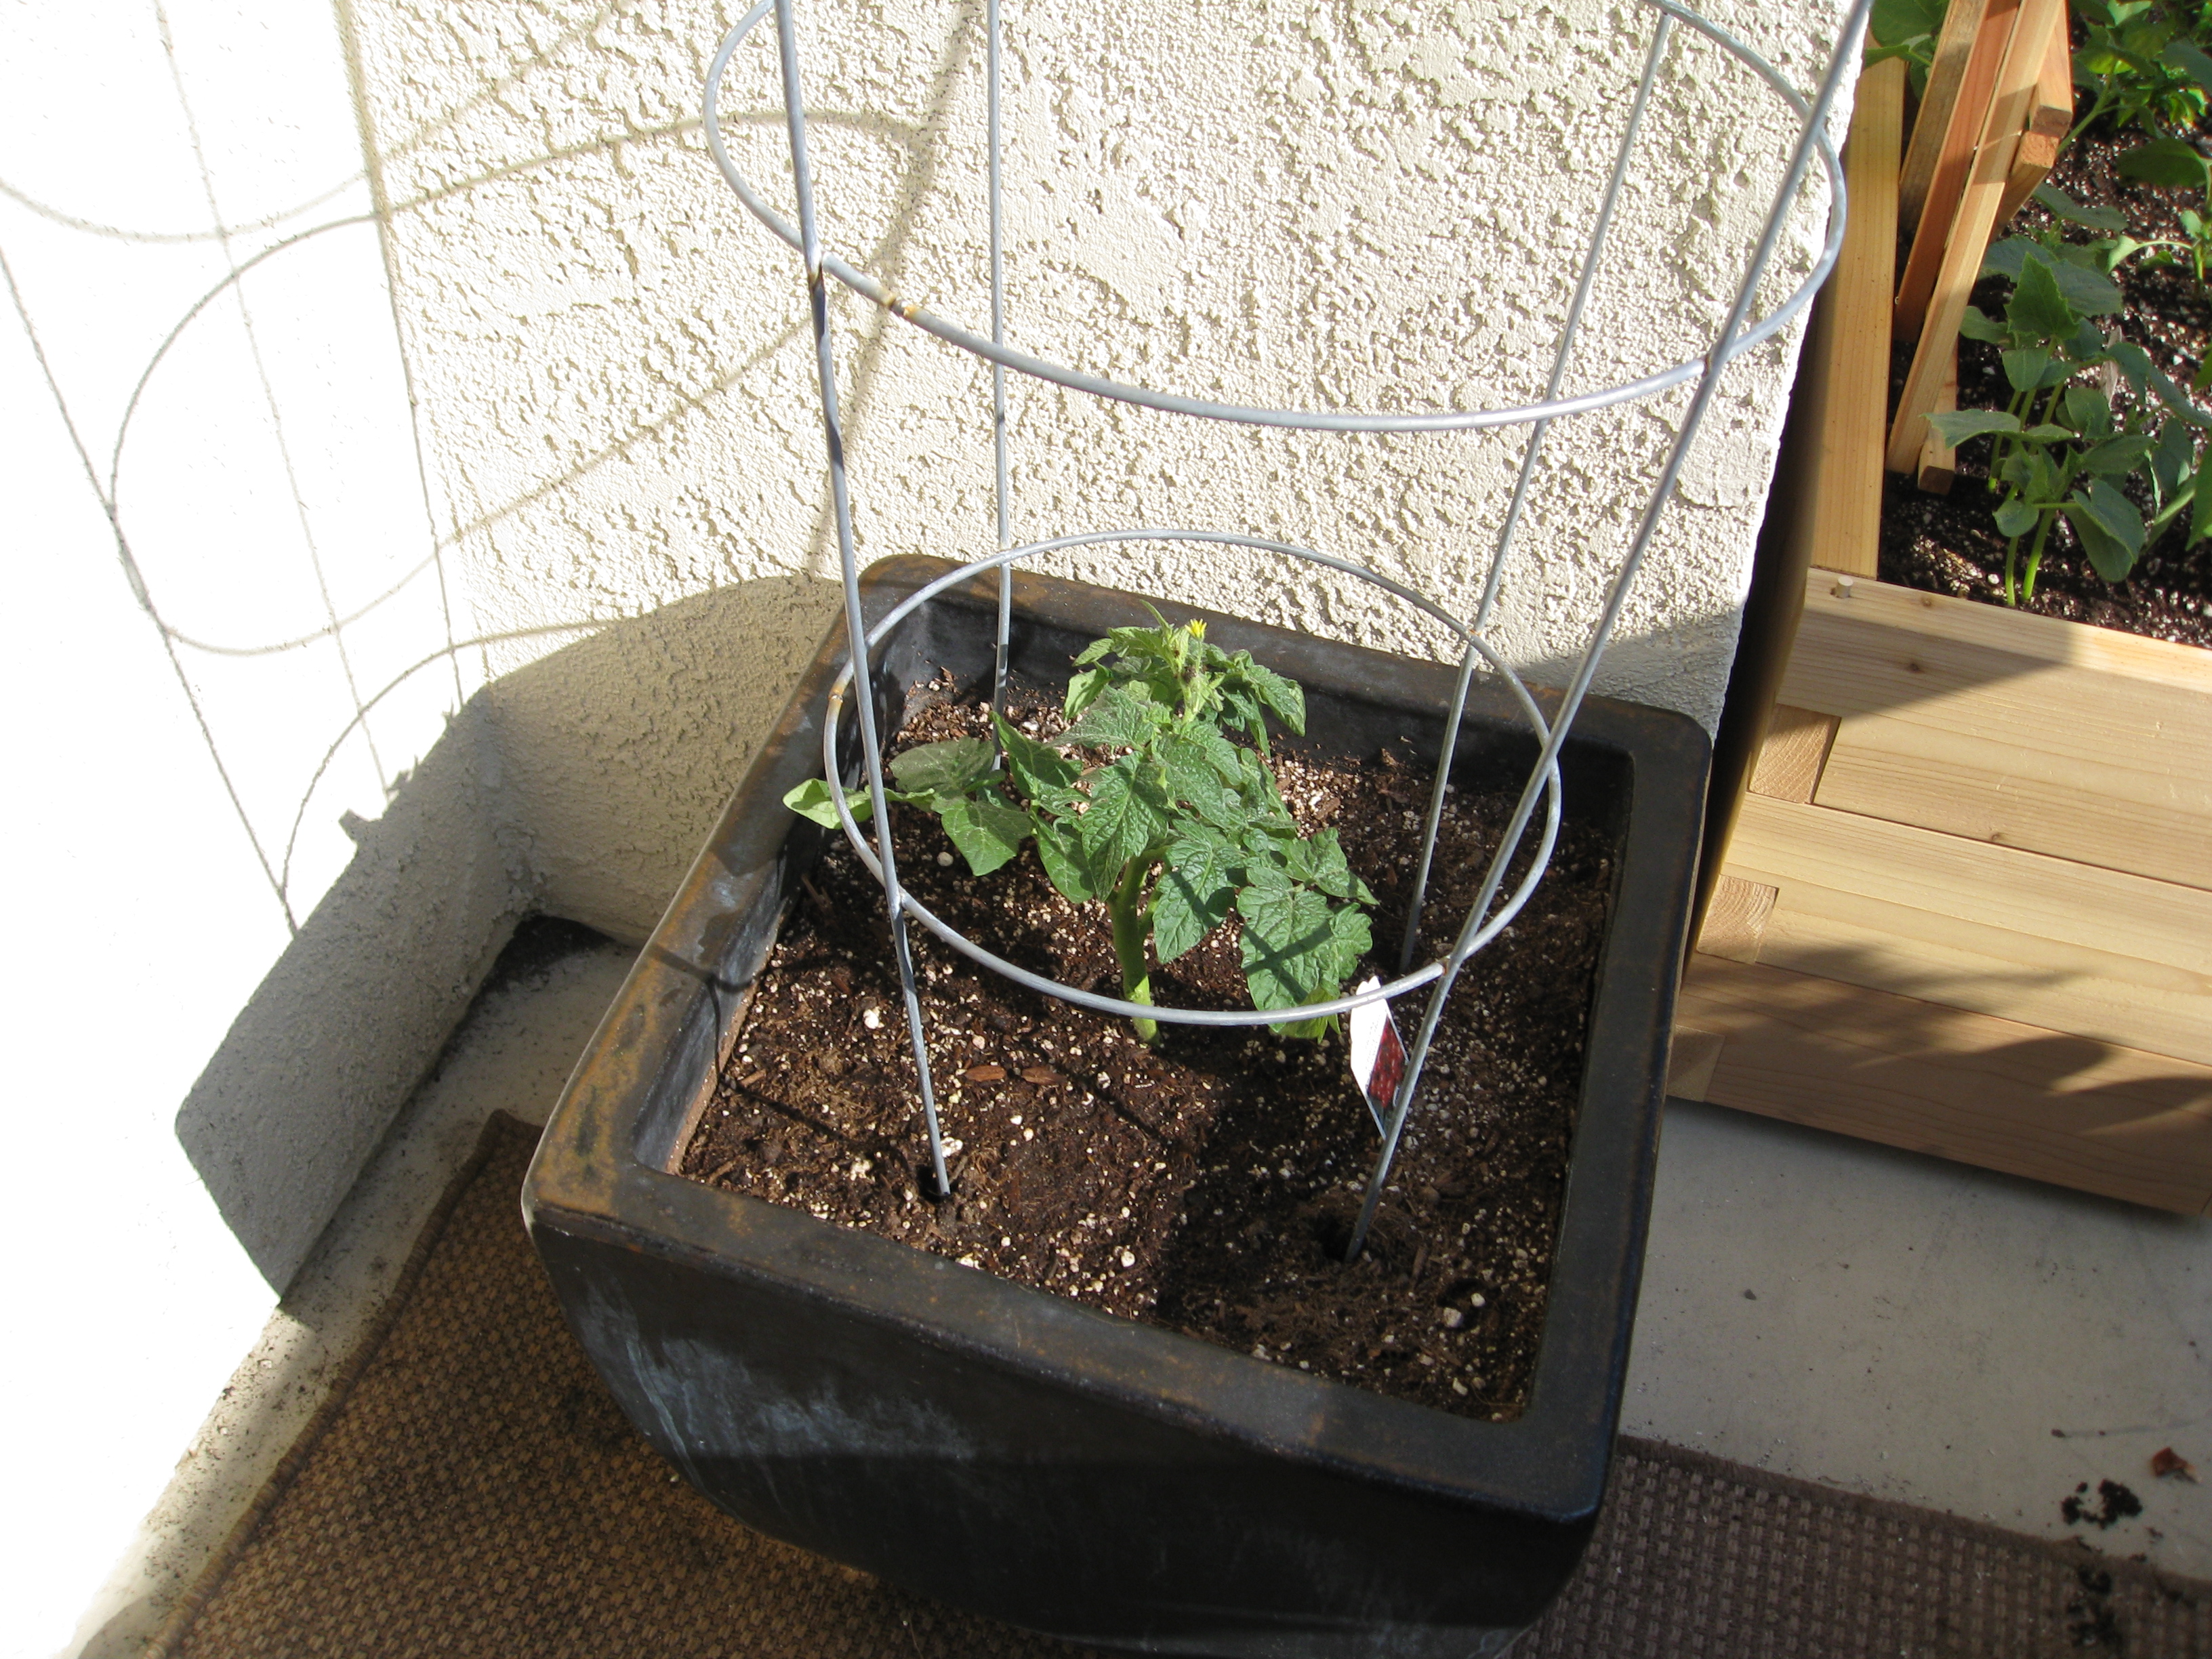 A cherry tomato (which grows well along the coast) occupies former "sad grass" pot. 